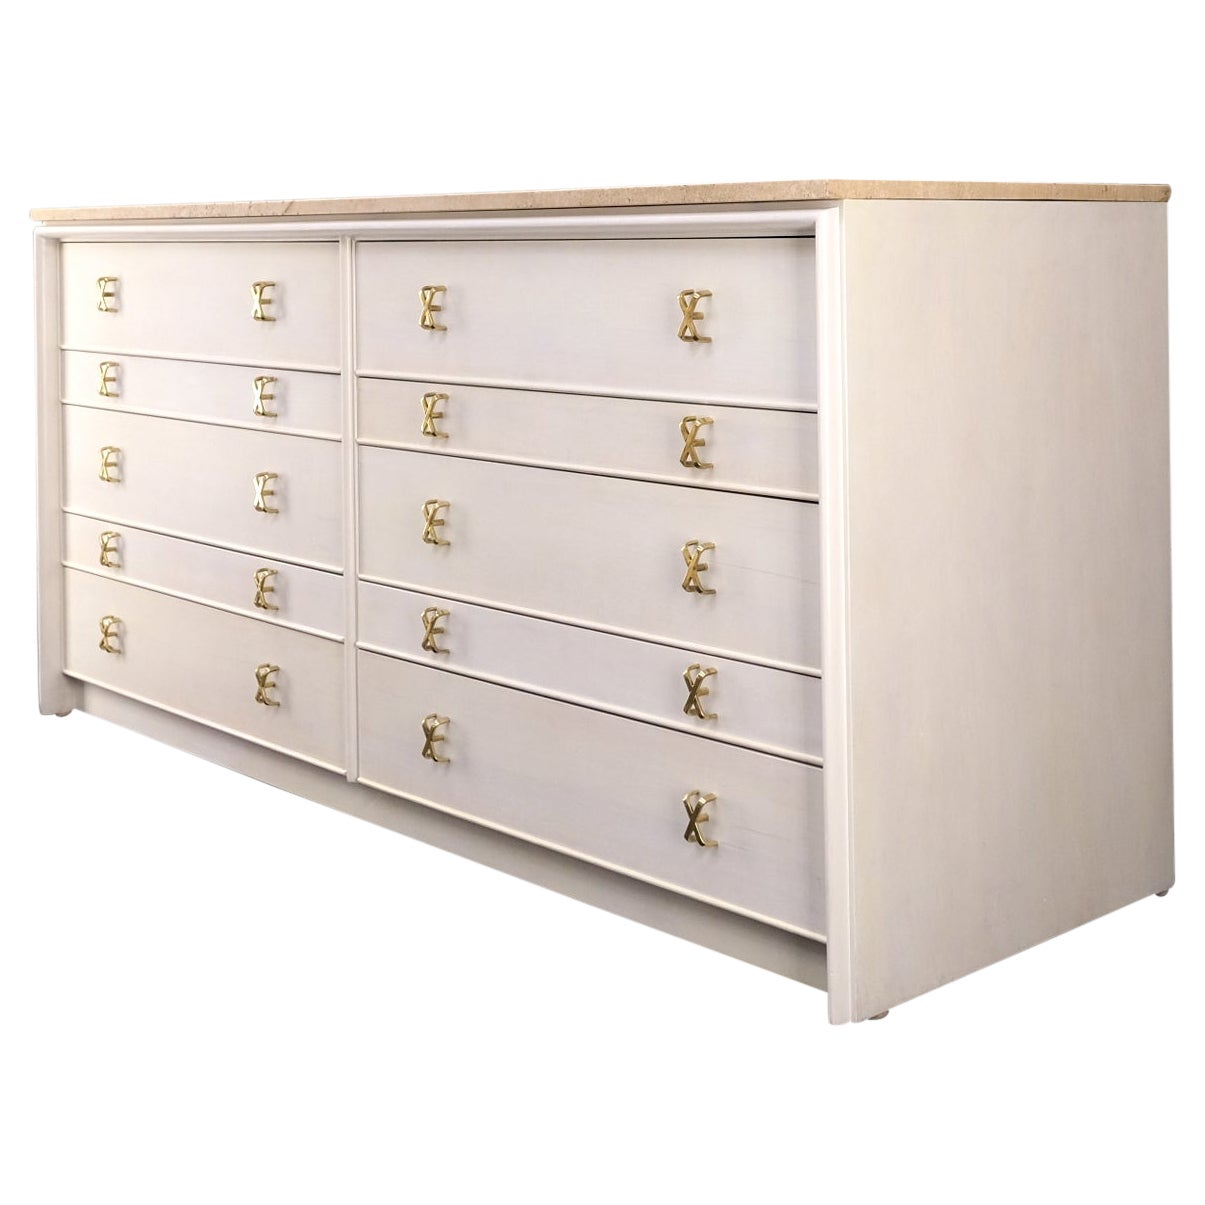 Paul Frankl for Johnson White Wash Marble Top 10 Drawers Dresser Brass x Pulls